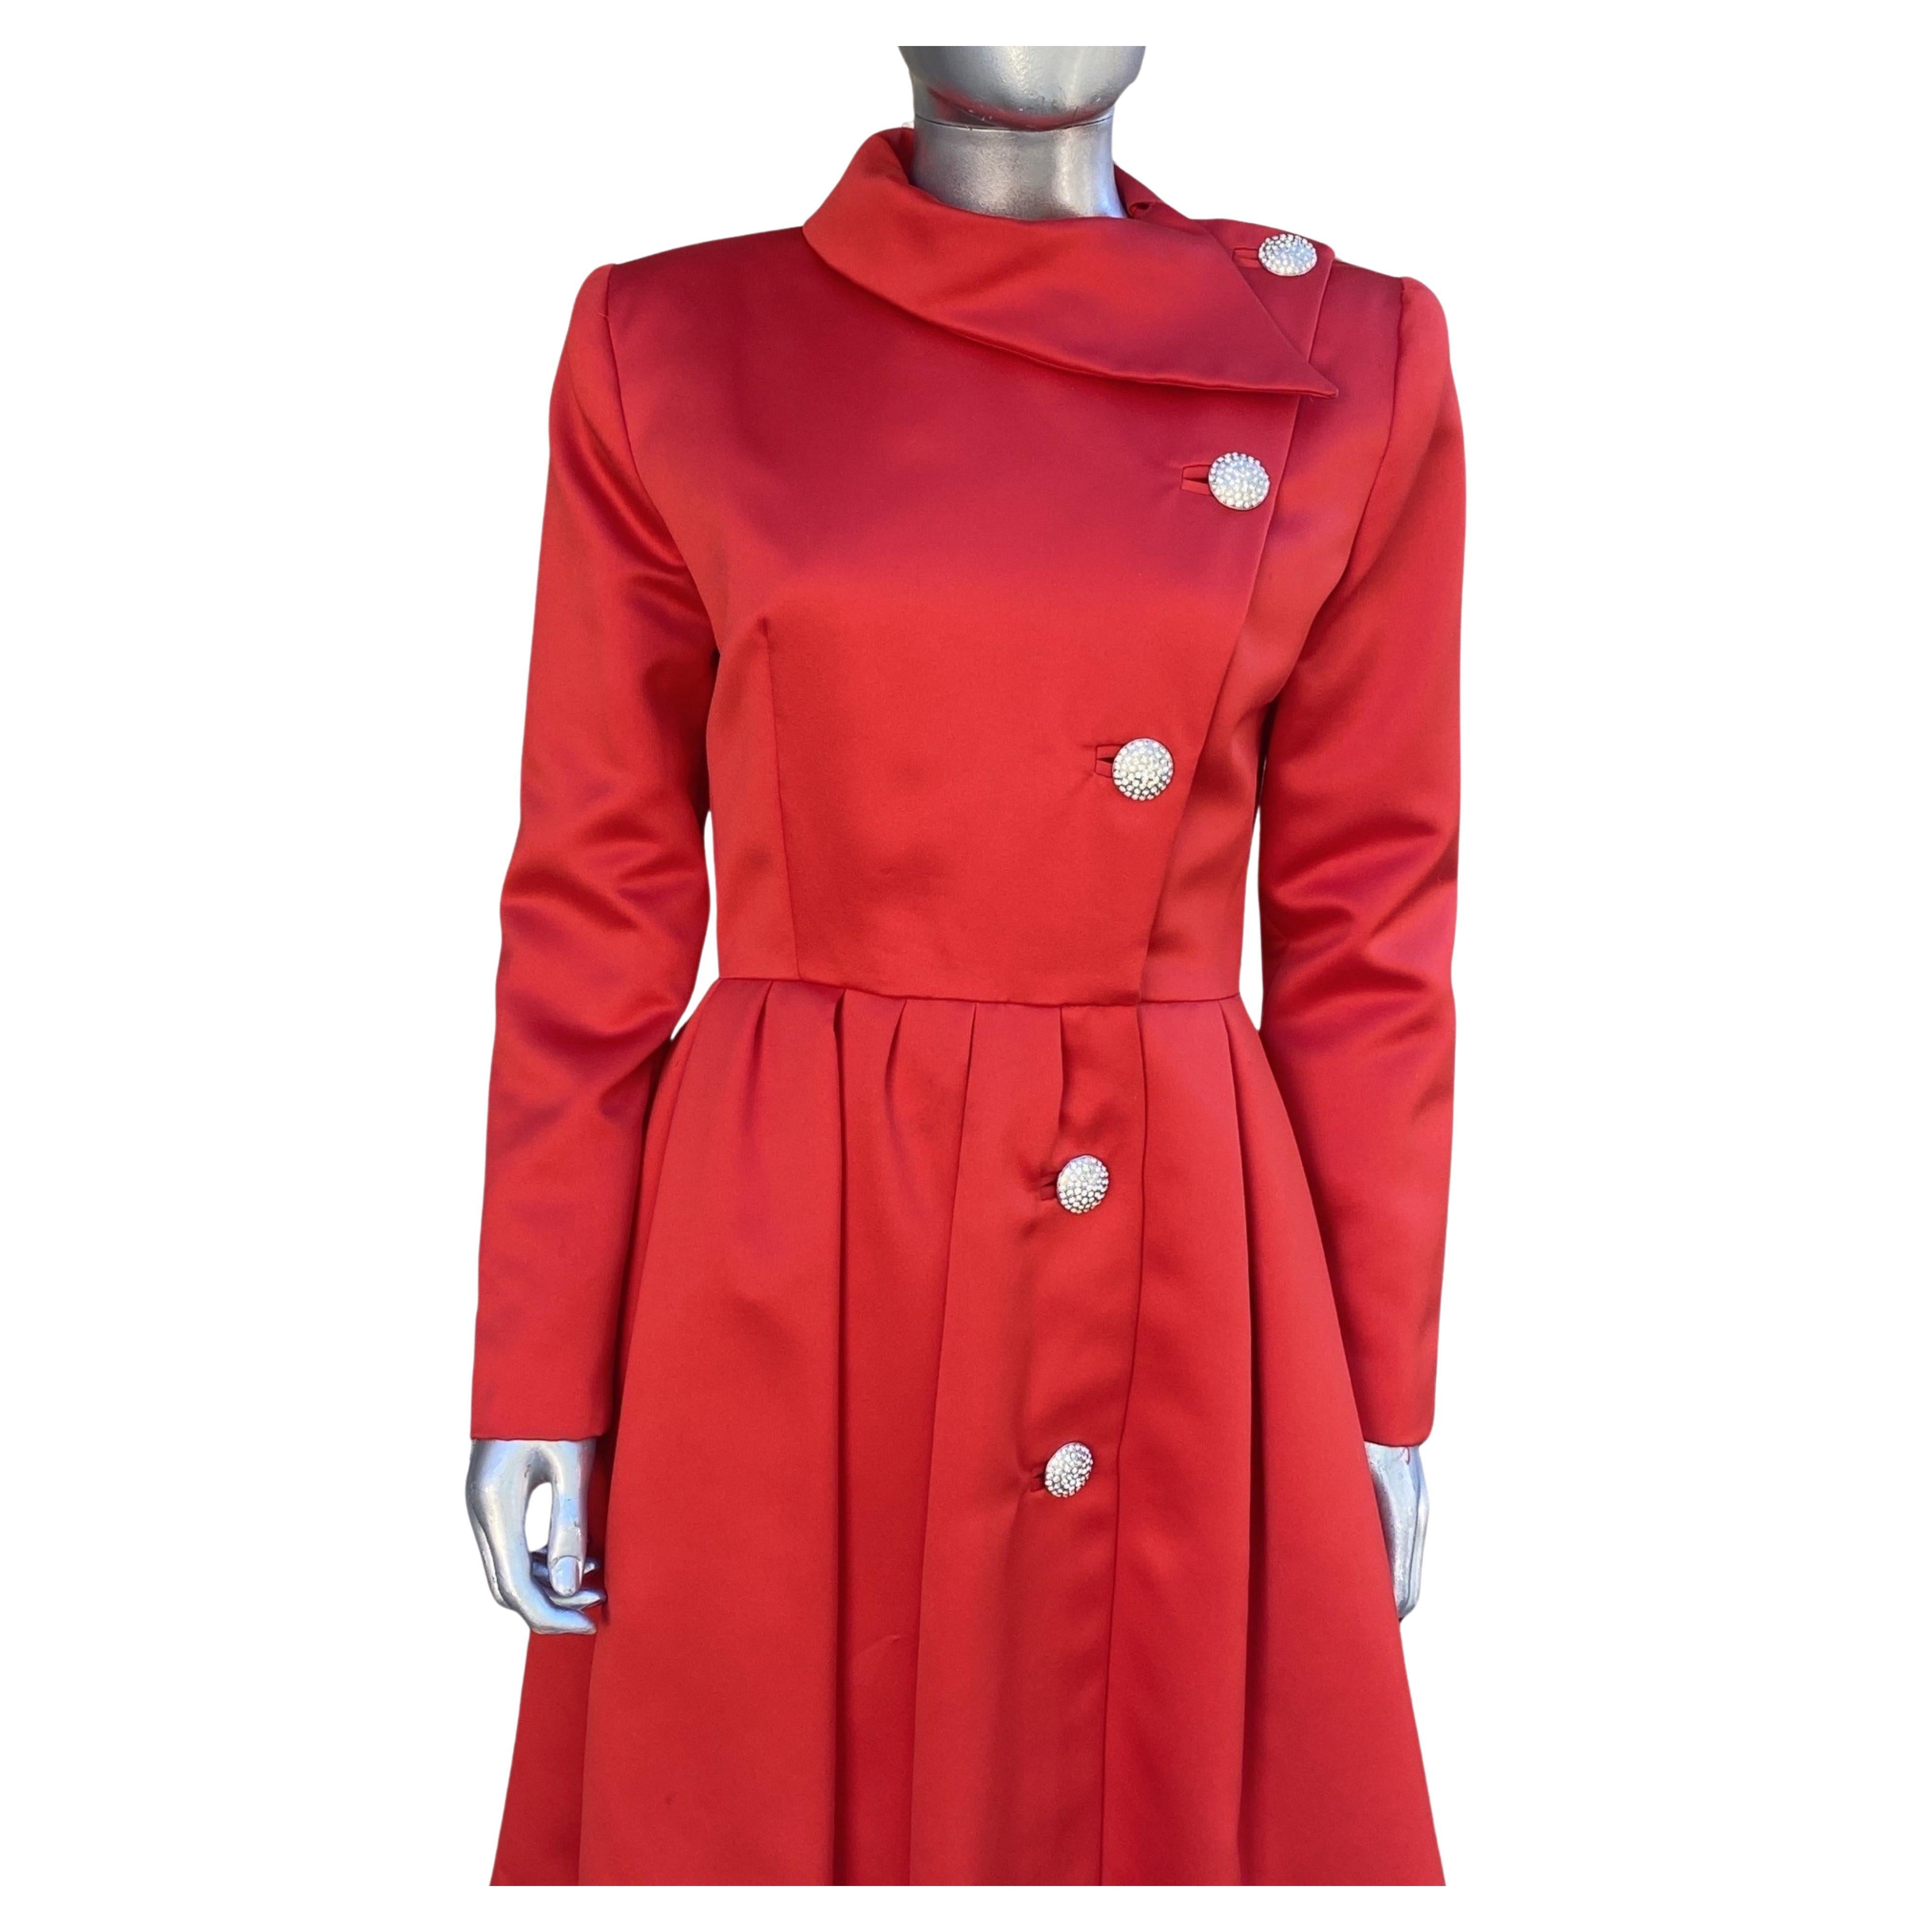 This dress is the most perfect vintage class ic and chic thing to wear for a holiday party. We are a big fan of Victor Costa designs and this beauty was purchased at Neiman Marcus in Beverly Hills by the original owner. The coat dress is done in the